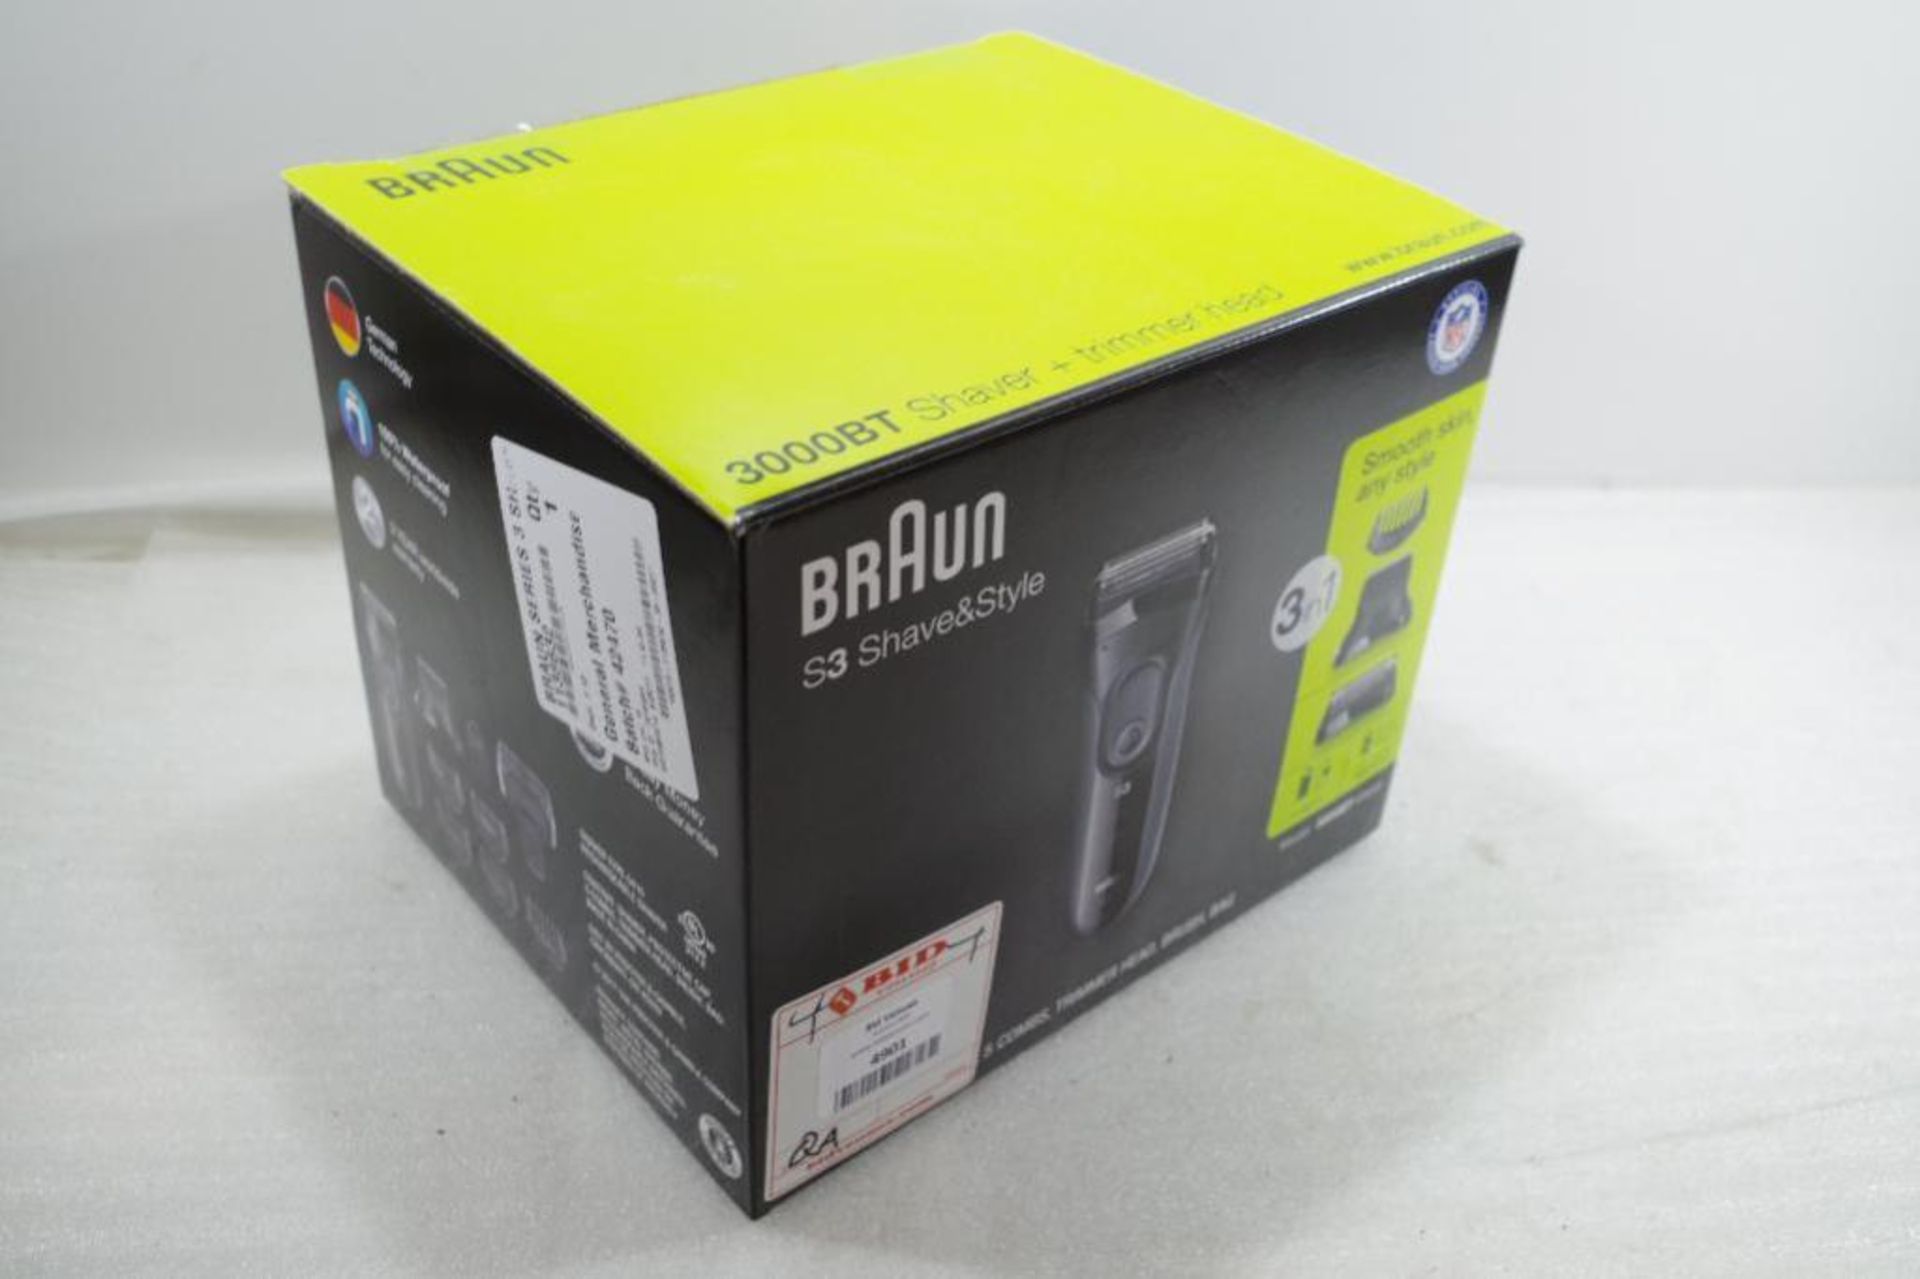 BRAUN 3-in-1 Shaver - Image 2 of 4